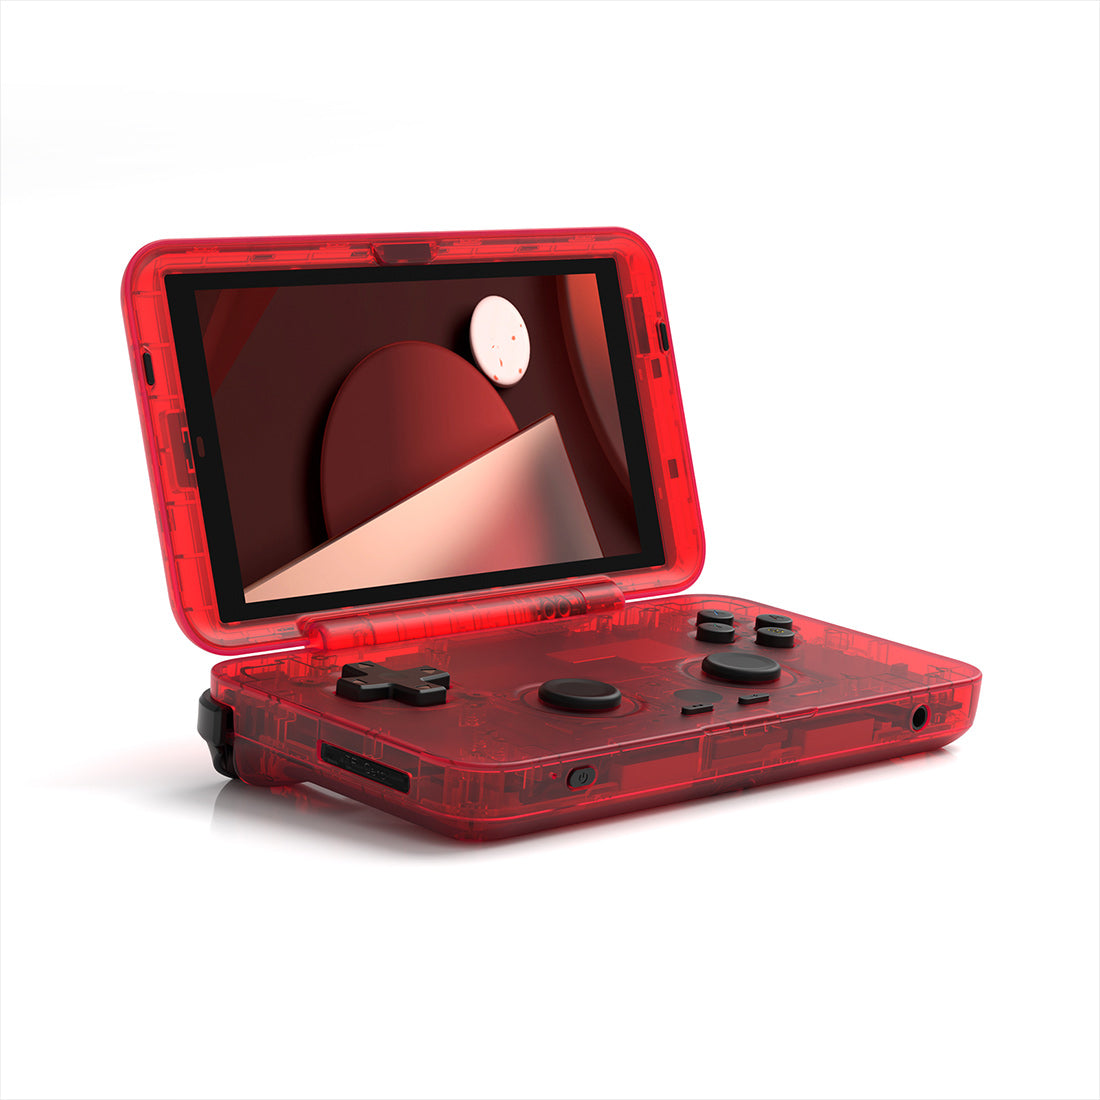 Retroid Pocket Flip Android Handheld Game Console - Red